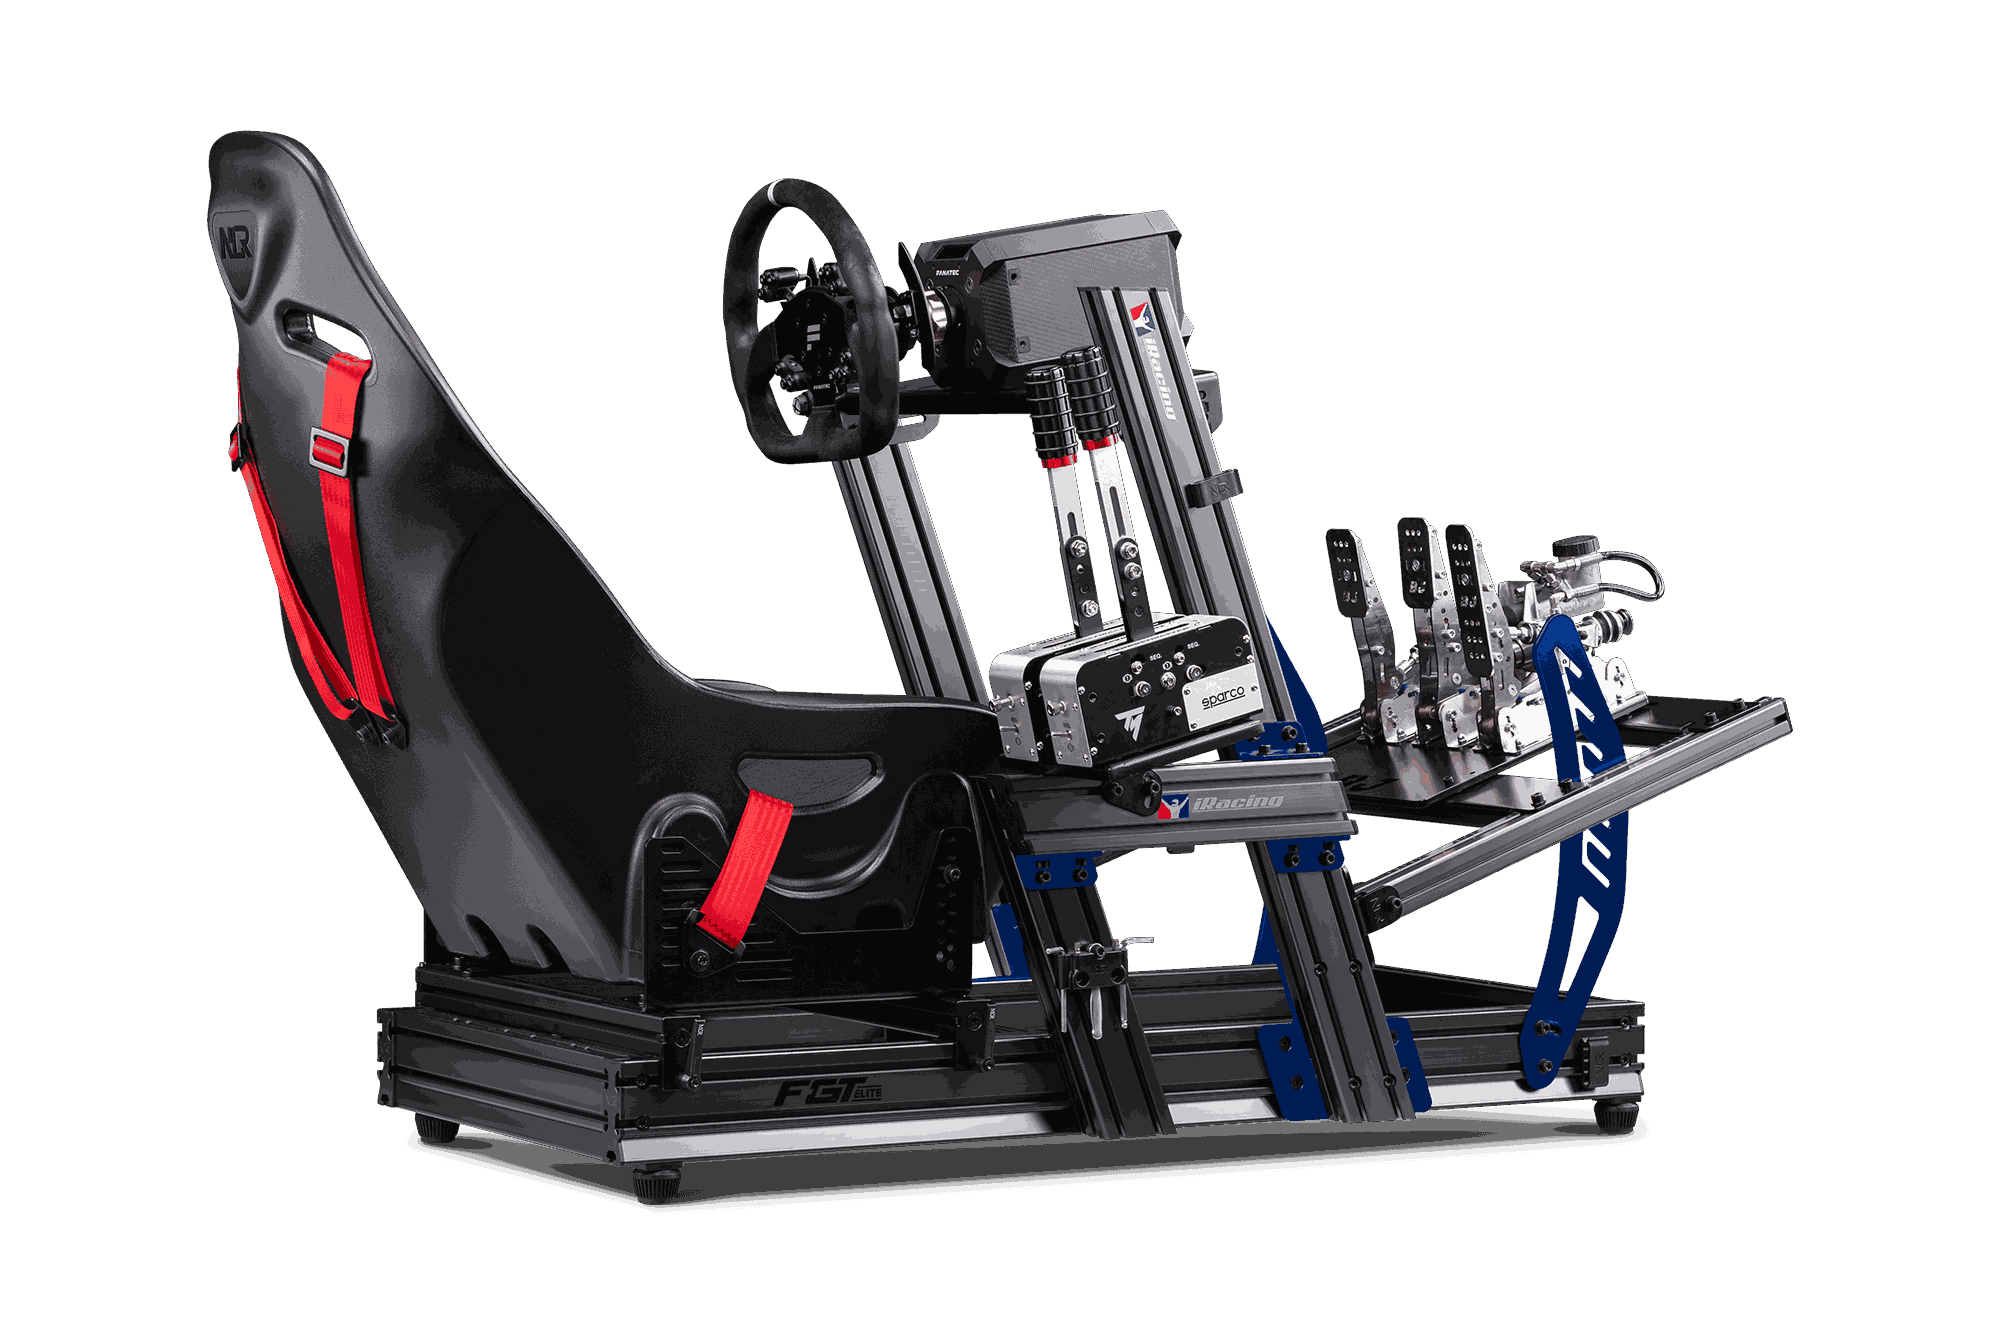 Next Level Racing. Next Level Racing traction Plus Motion Plattform. Racing Level. Next Level Racing Driving Force Shifter Lite Review. Level race